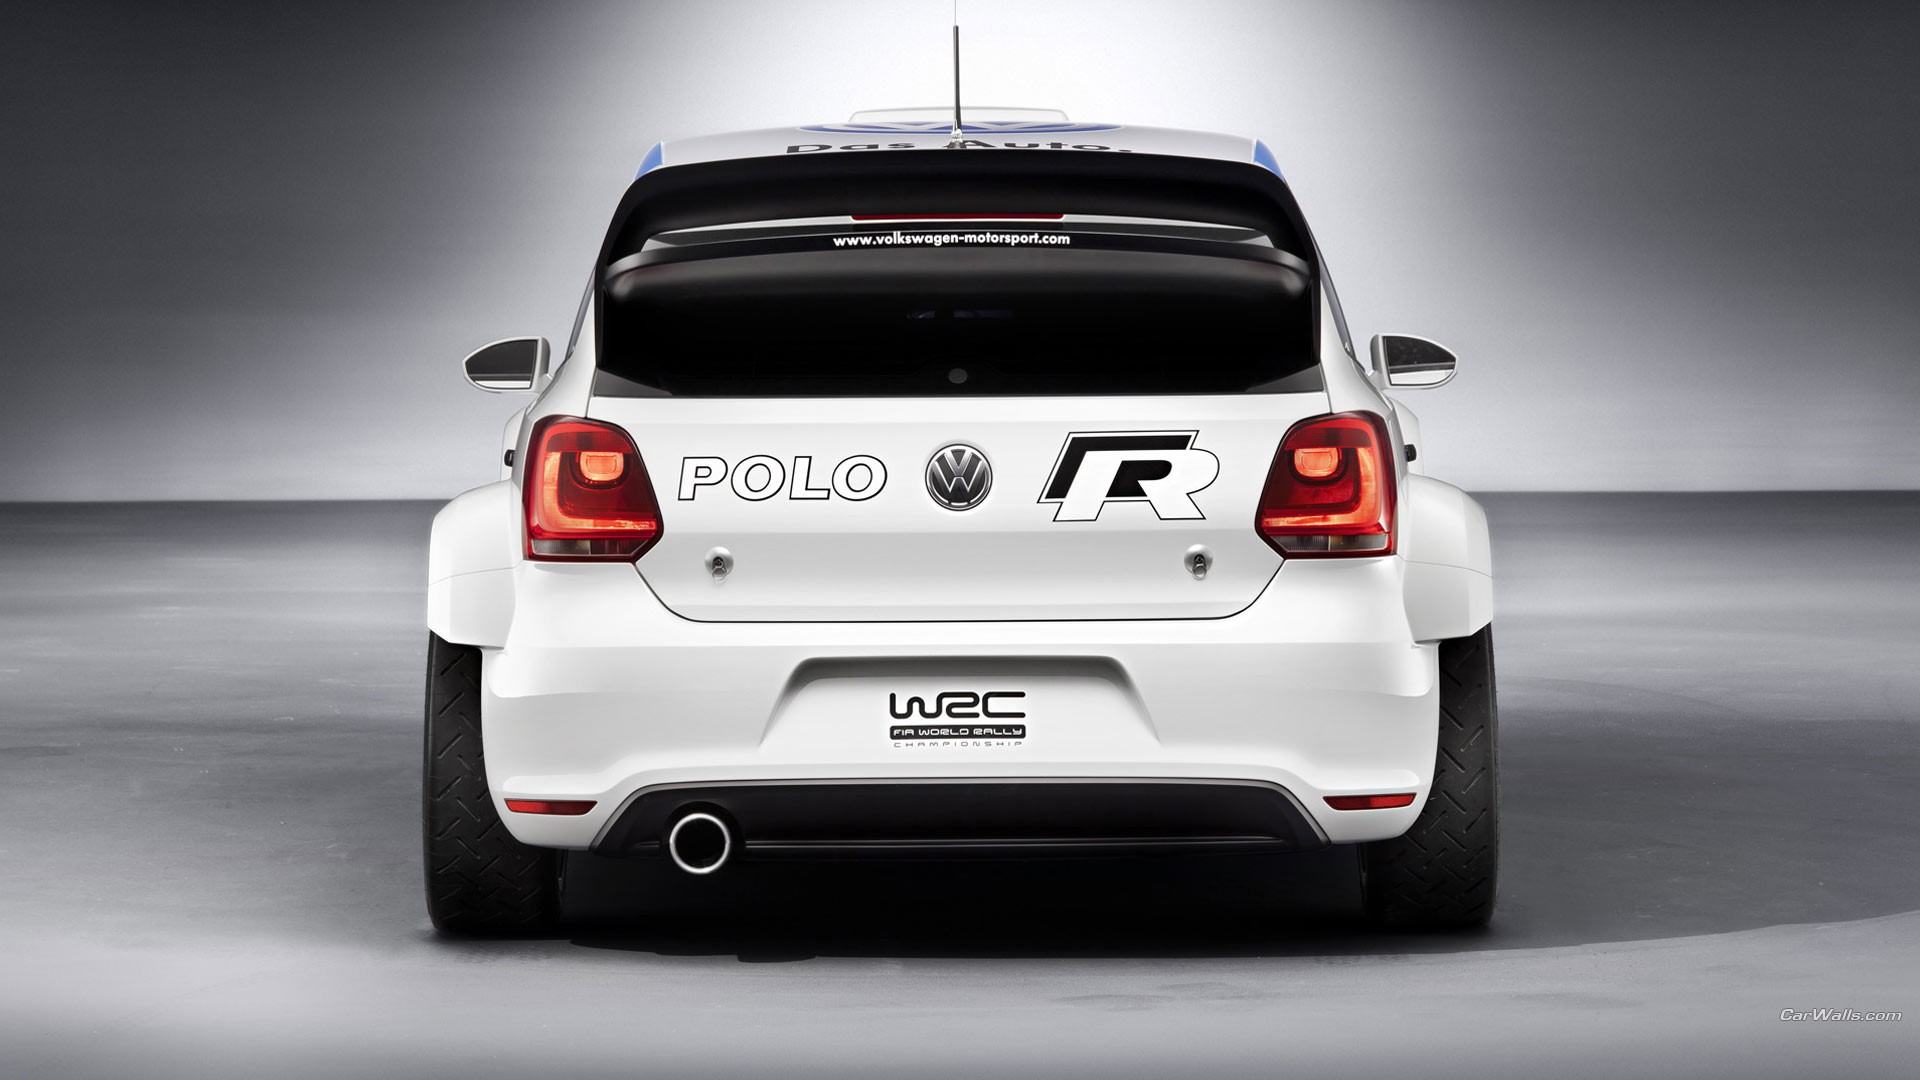 General 1920x1080 car Volkswagen VW Polo WRC rally cars Volkswagen Polo rear view vehicle white cars hatchbacks hot hatch German cars Volkswagen Group